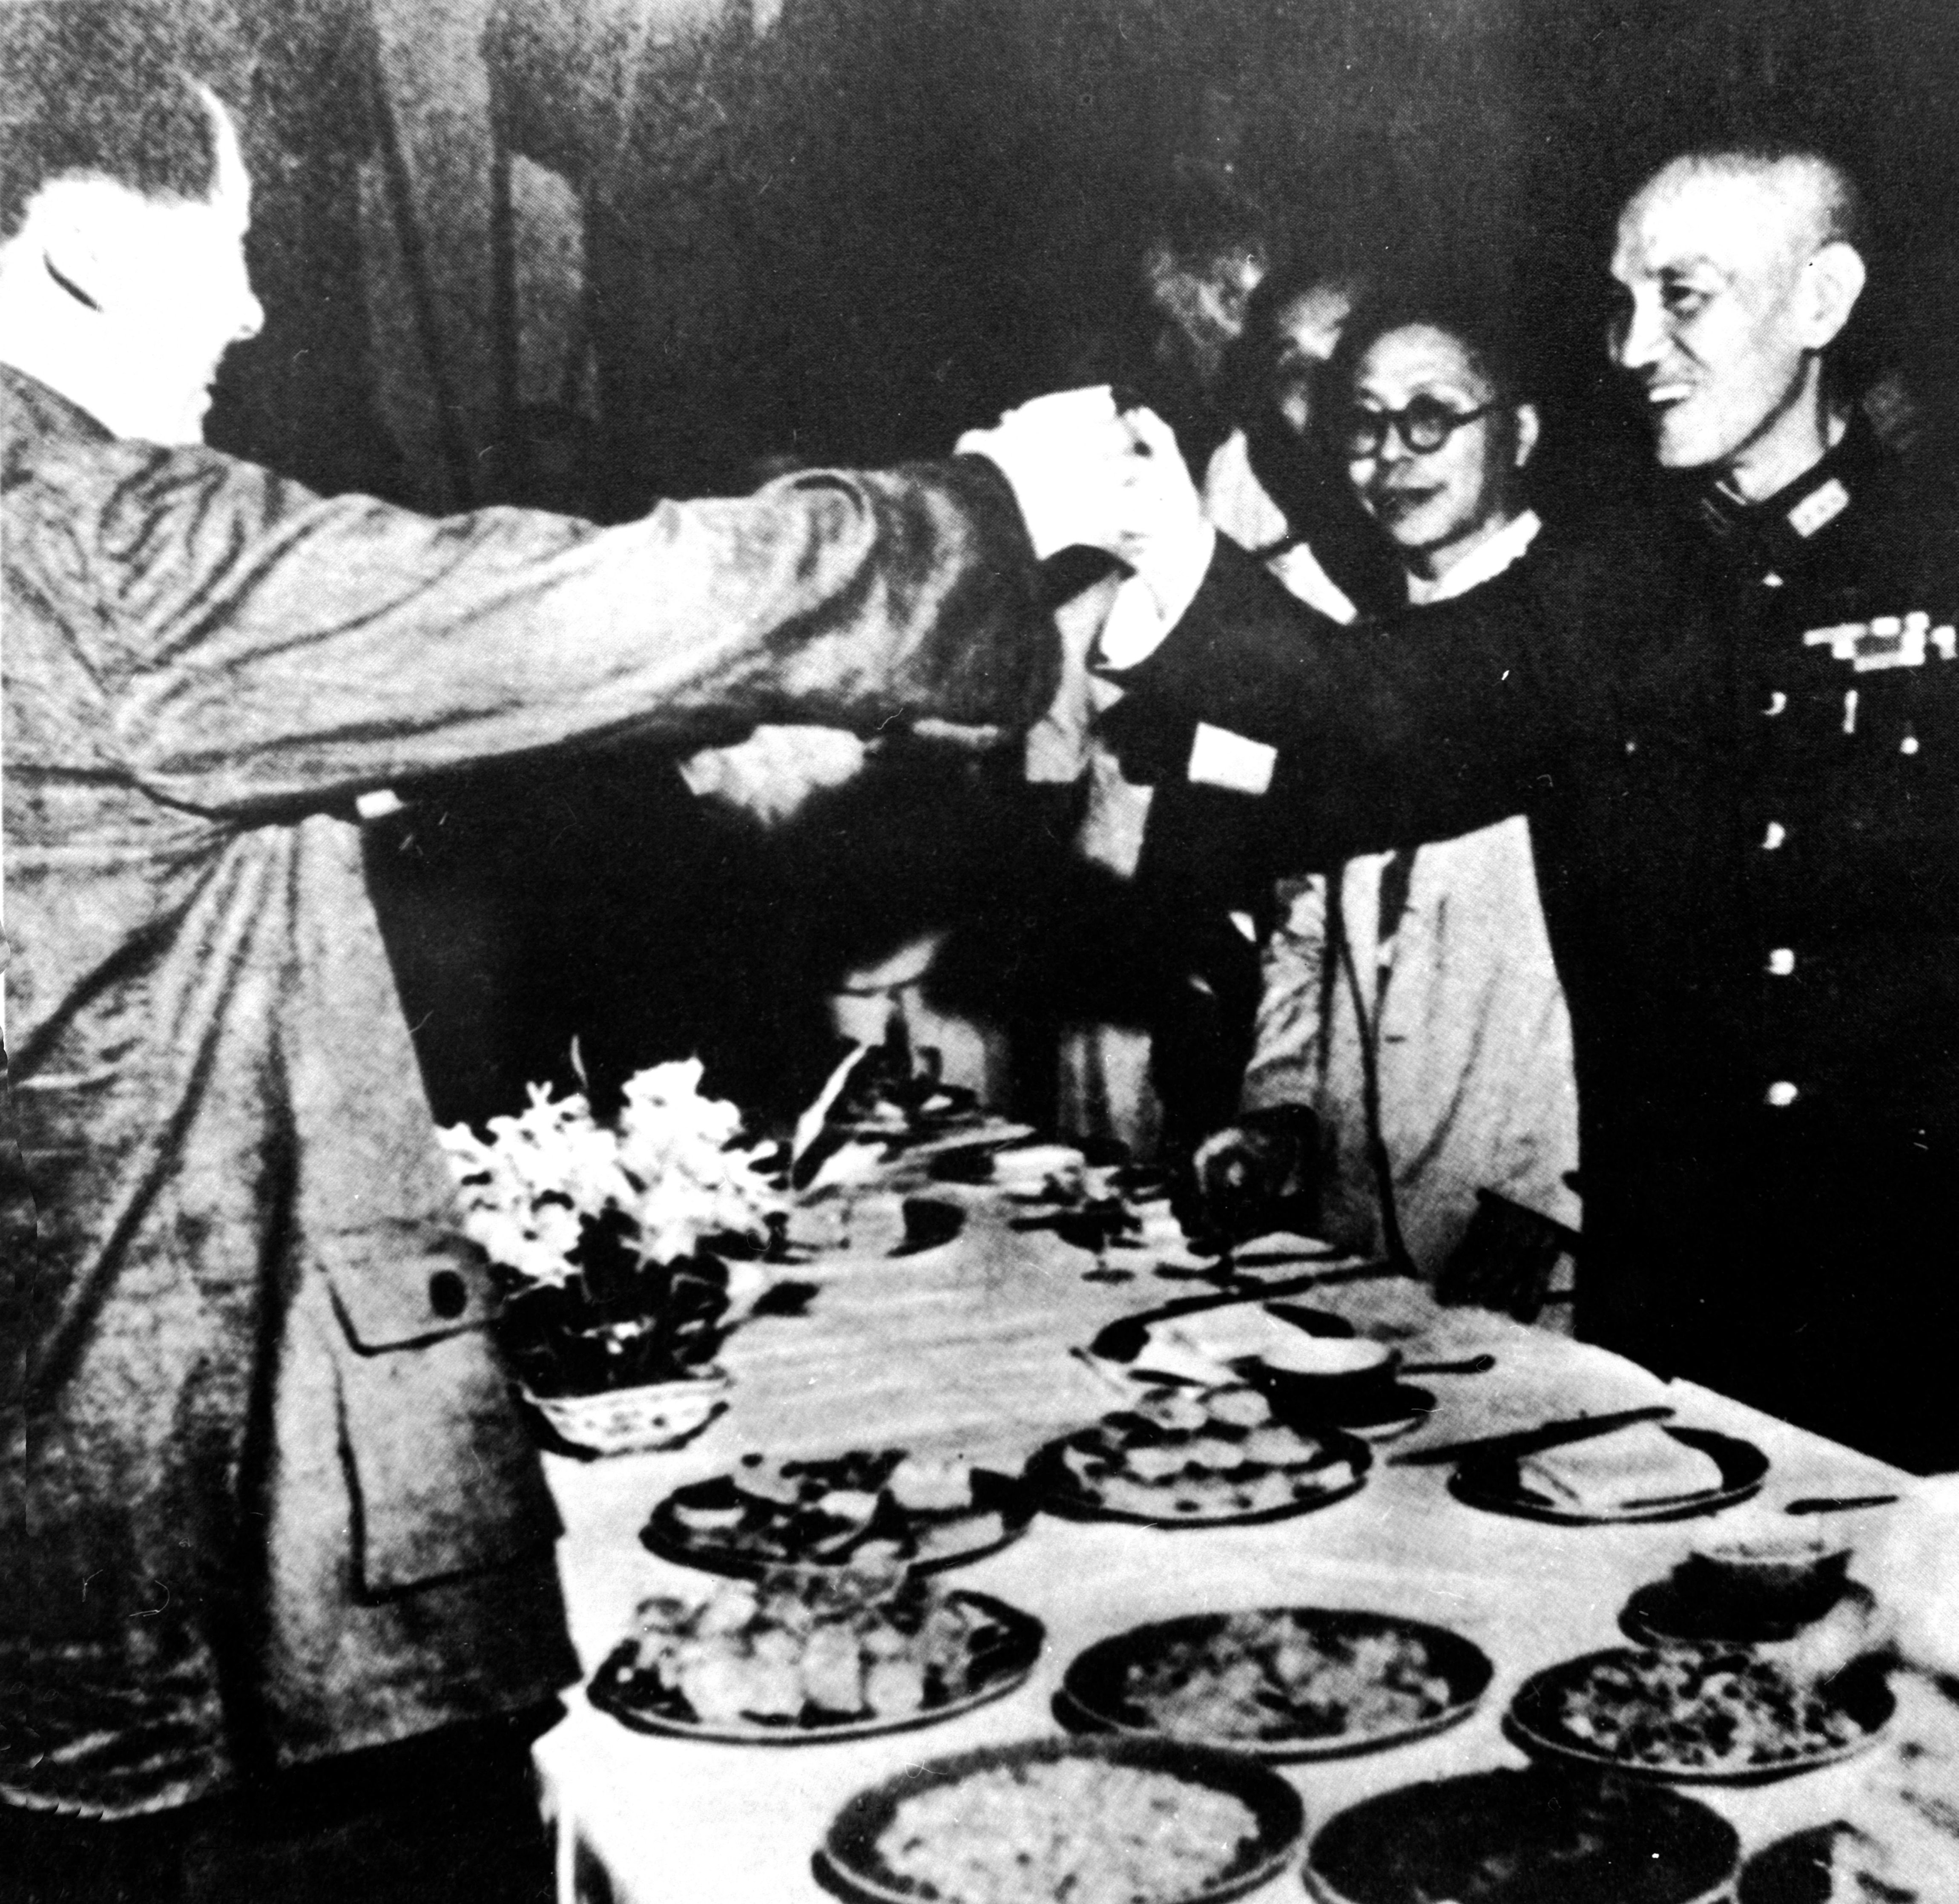 Mao Zedong and Jiang Kai-shek toast each other at a banquet held in Chongqing City, 1945.